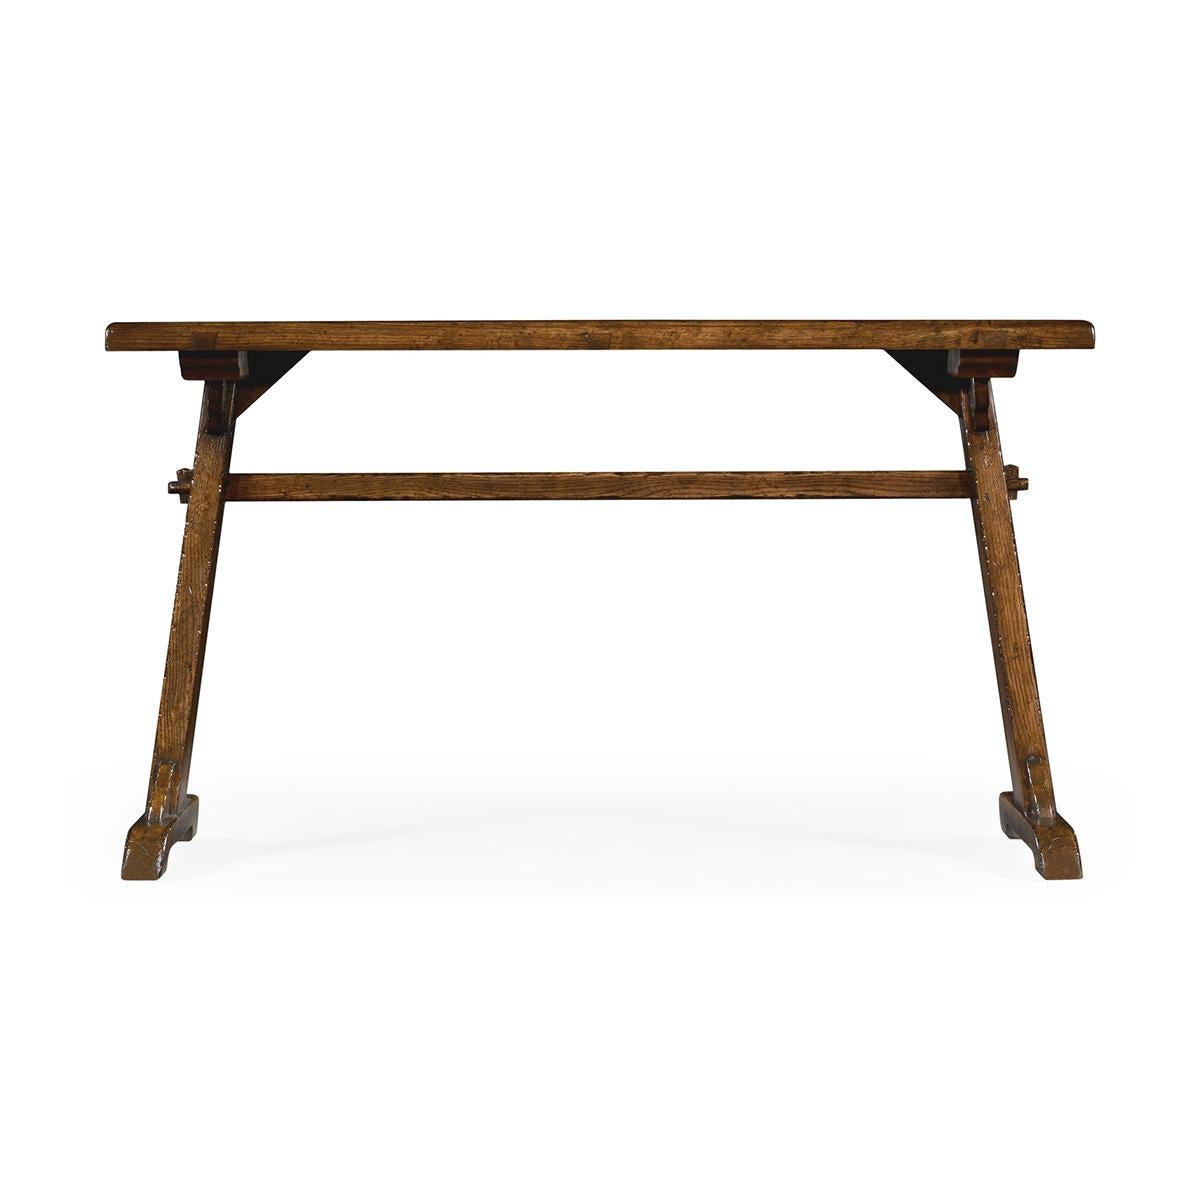 Country tavern table with a distressed country style dark oak with a planked top set over trestle ends and sled-type feet. 

Dimensions: 52